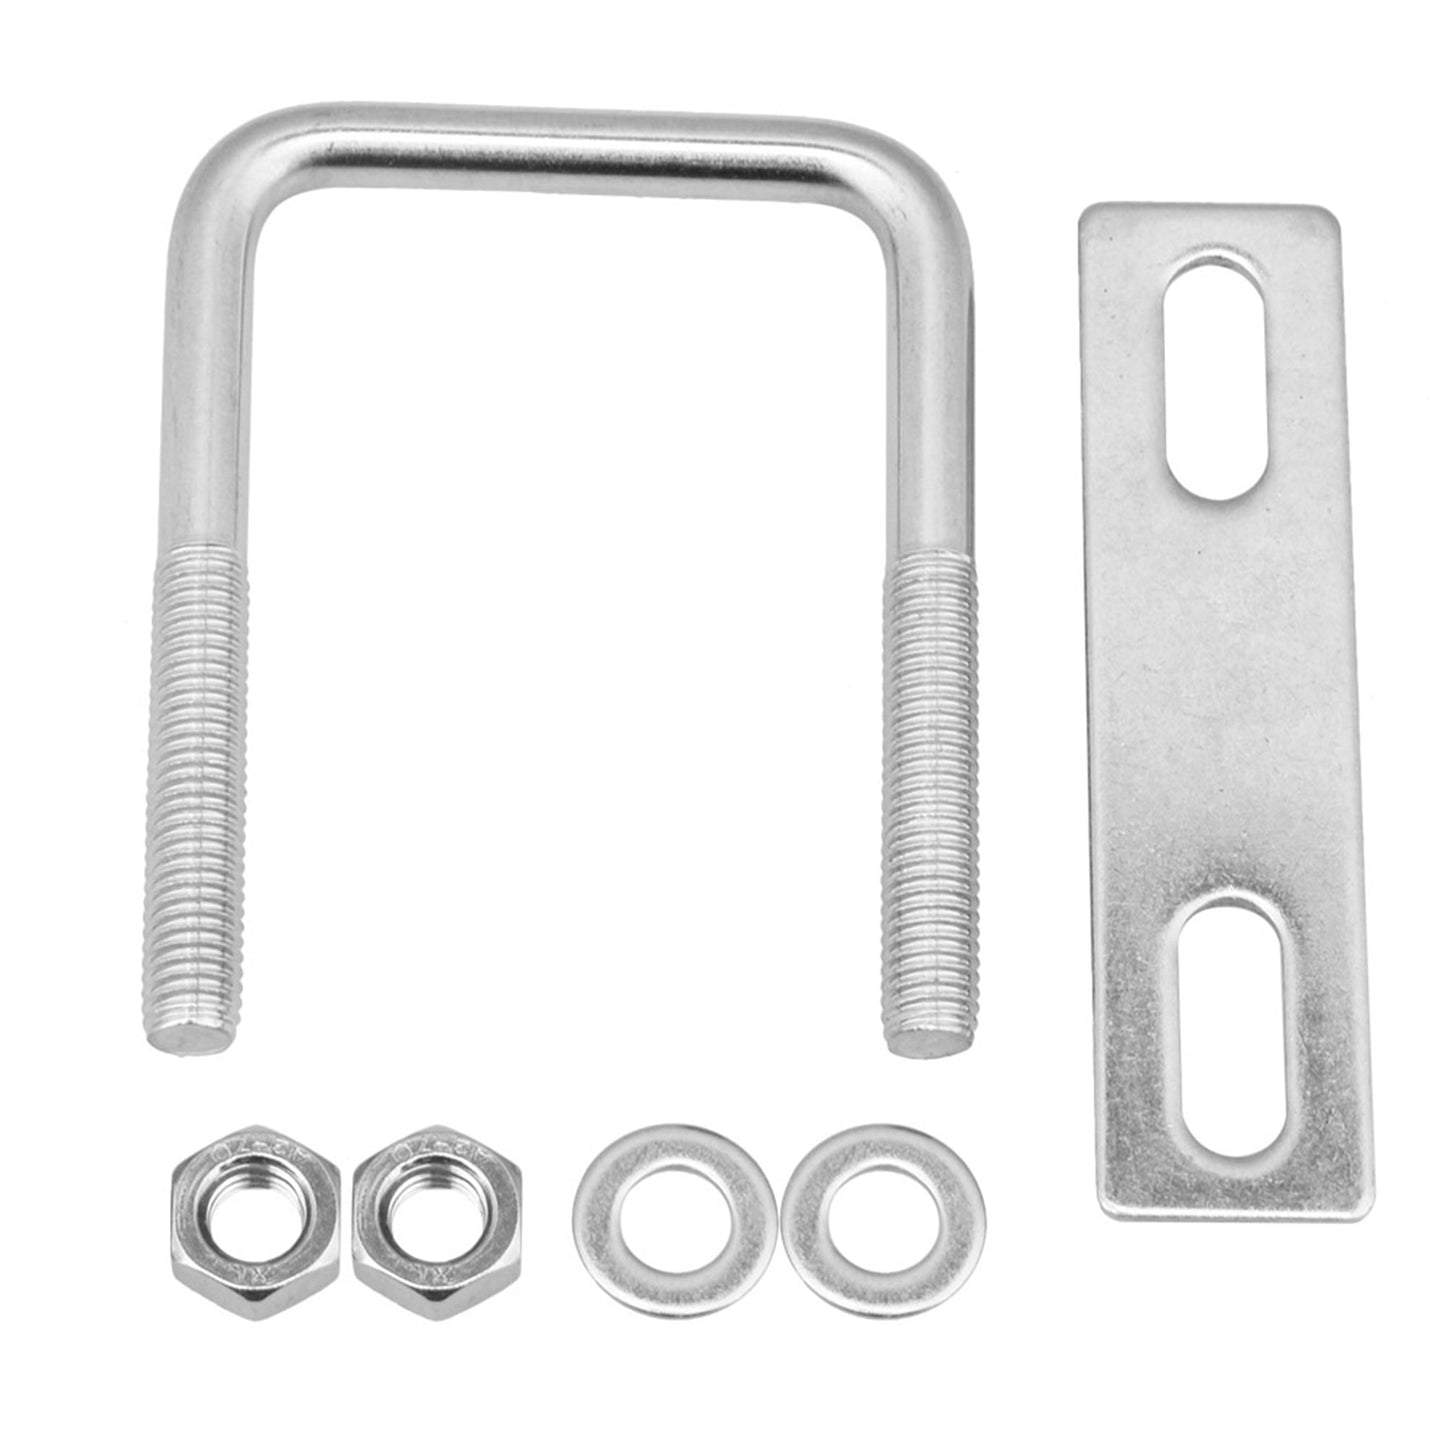 BQLZR 304 Stainless Steel Square U-Shaped Bolts M8x50x80mm Fixed Axles Parts Slive